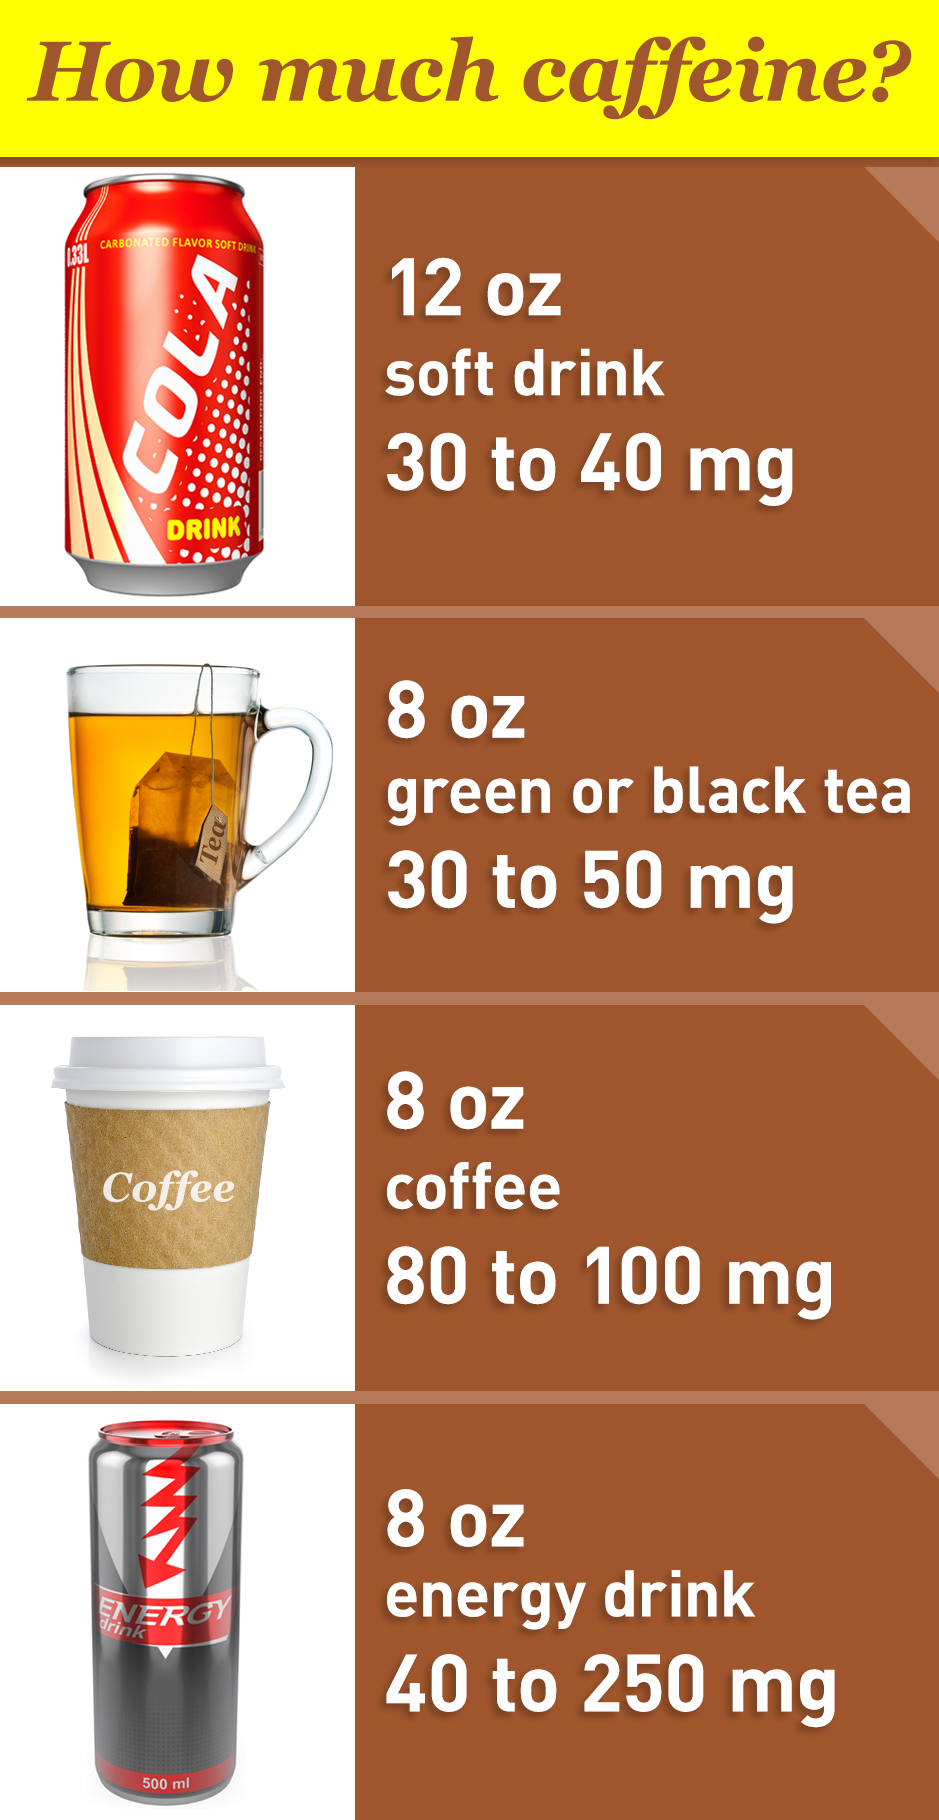 How much caffeine is in these beverages?